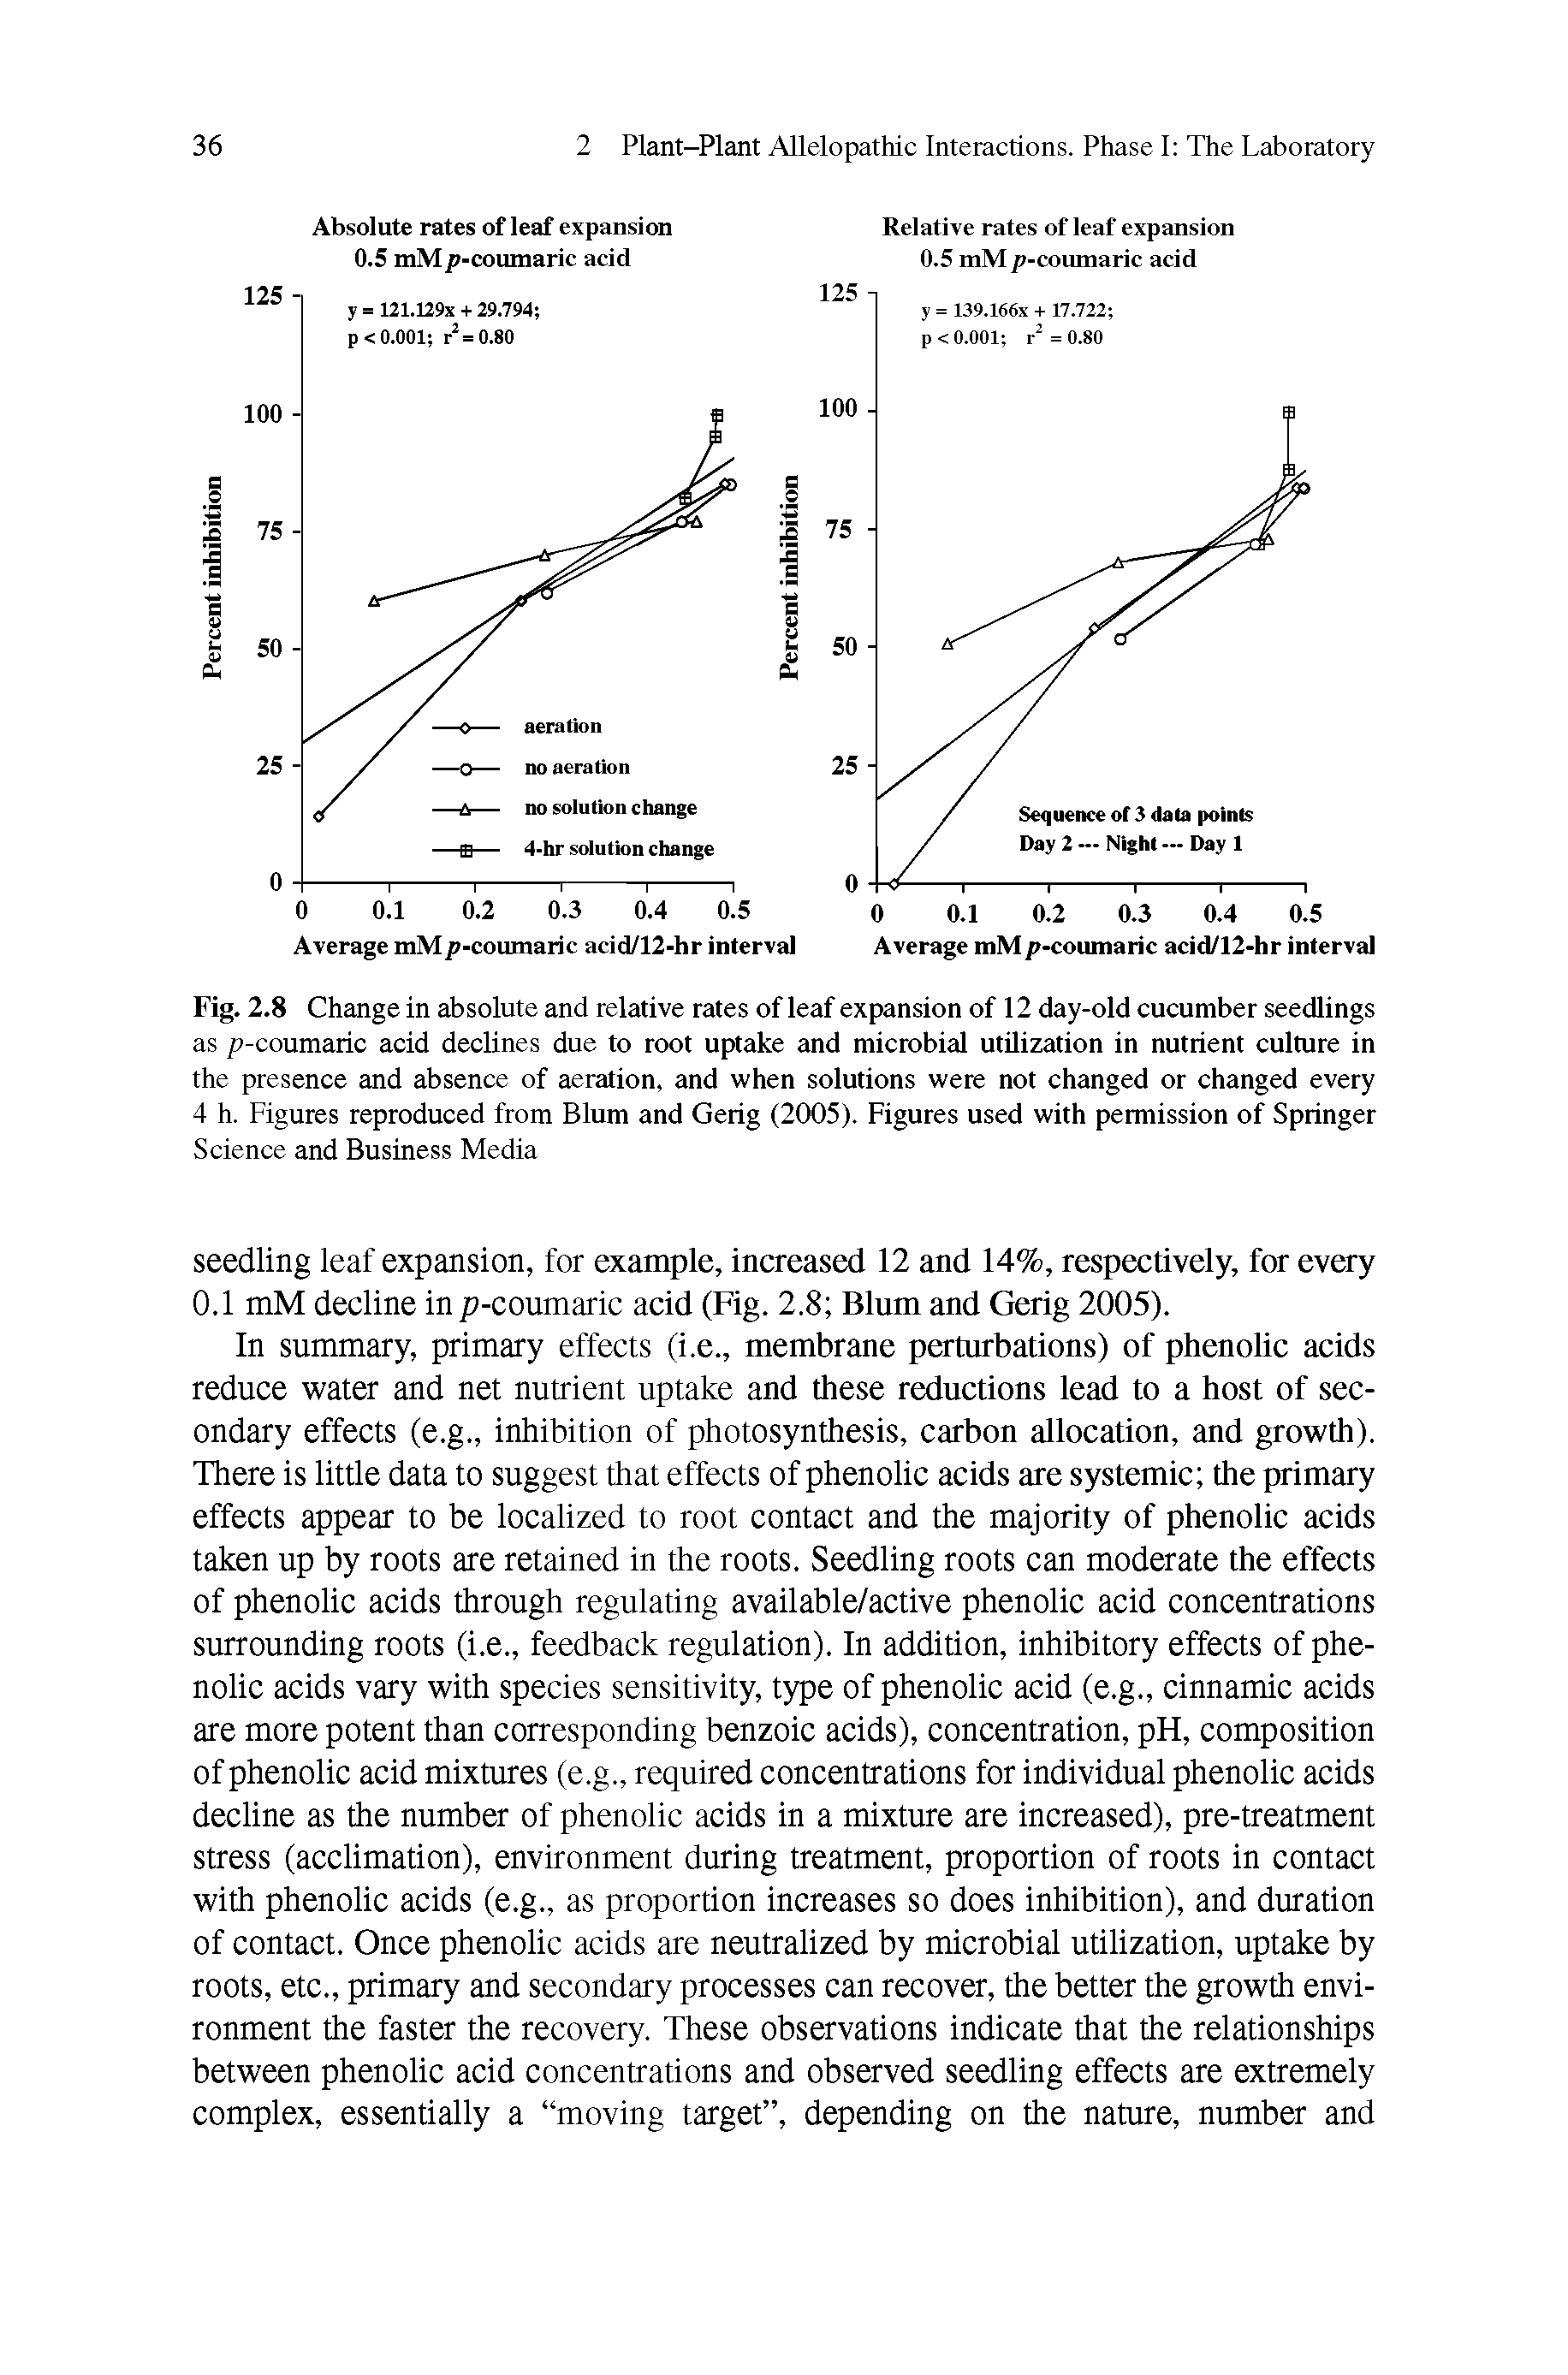 Fig. 2.8 Change in absolute and relative rates of leaf expansion of 12 day-old cucumber seedlings as p-coumaric acid declines due to root uptake and microbial utilization in nutrient culture in the presence and absence of aeration, and when solutions were not changed or changed every 4 h. Figures reproduced from Blum and Gerig (2005). Figures used with permission of Springer Science and Business Media...